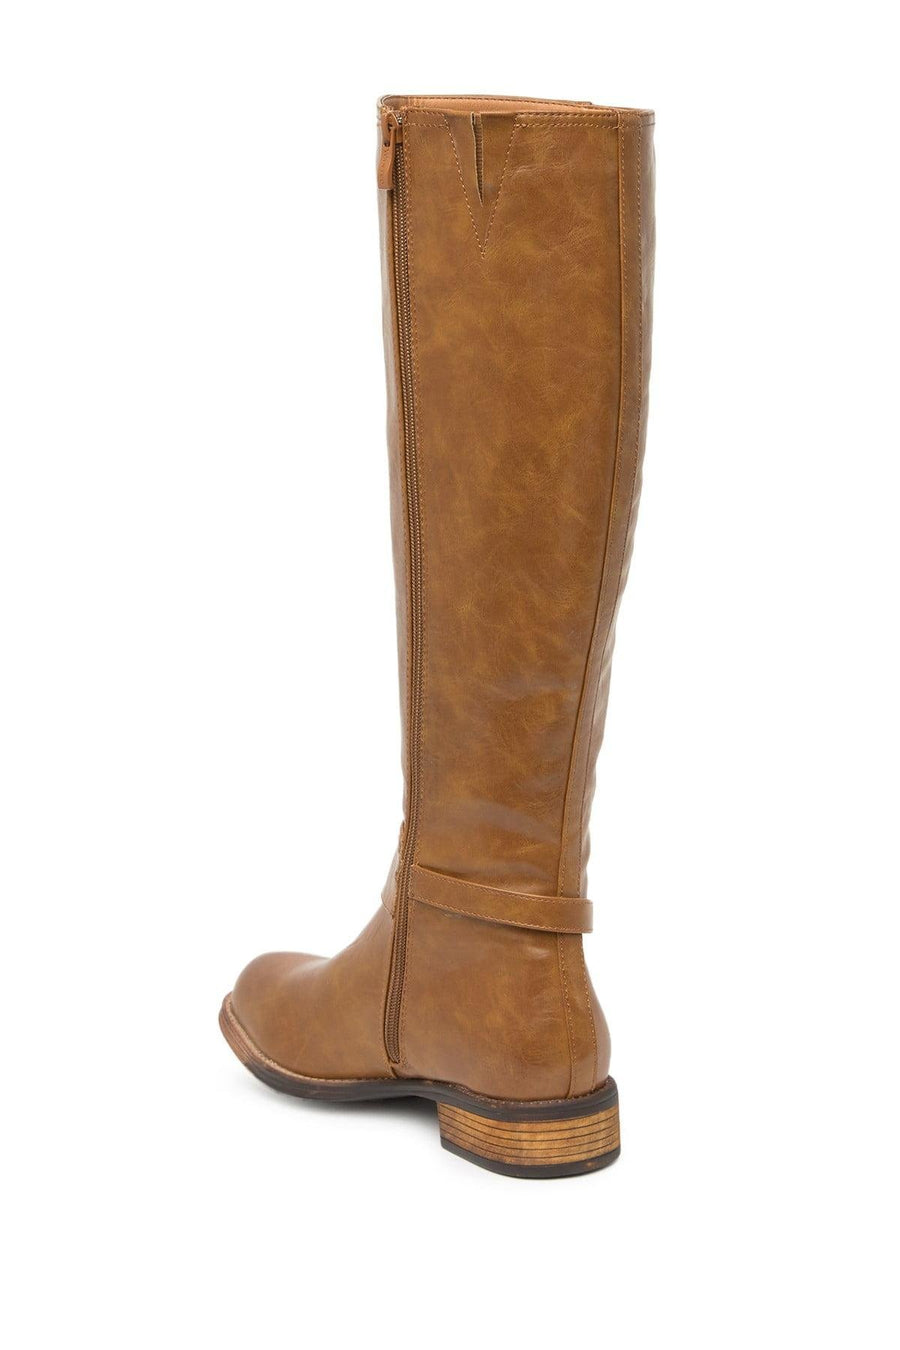 Wanted Garret Buckle Strap Riding Boot K054